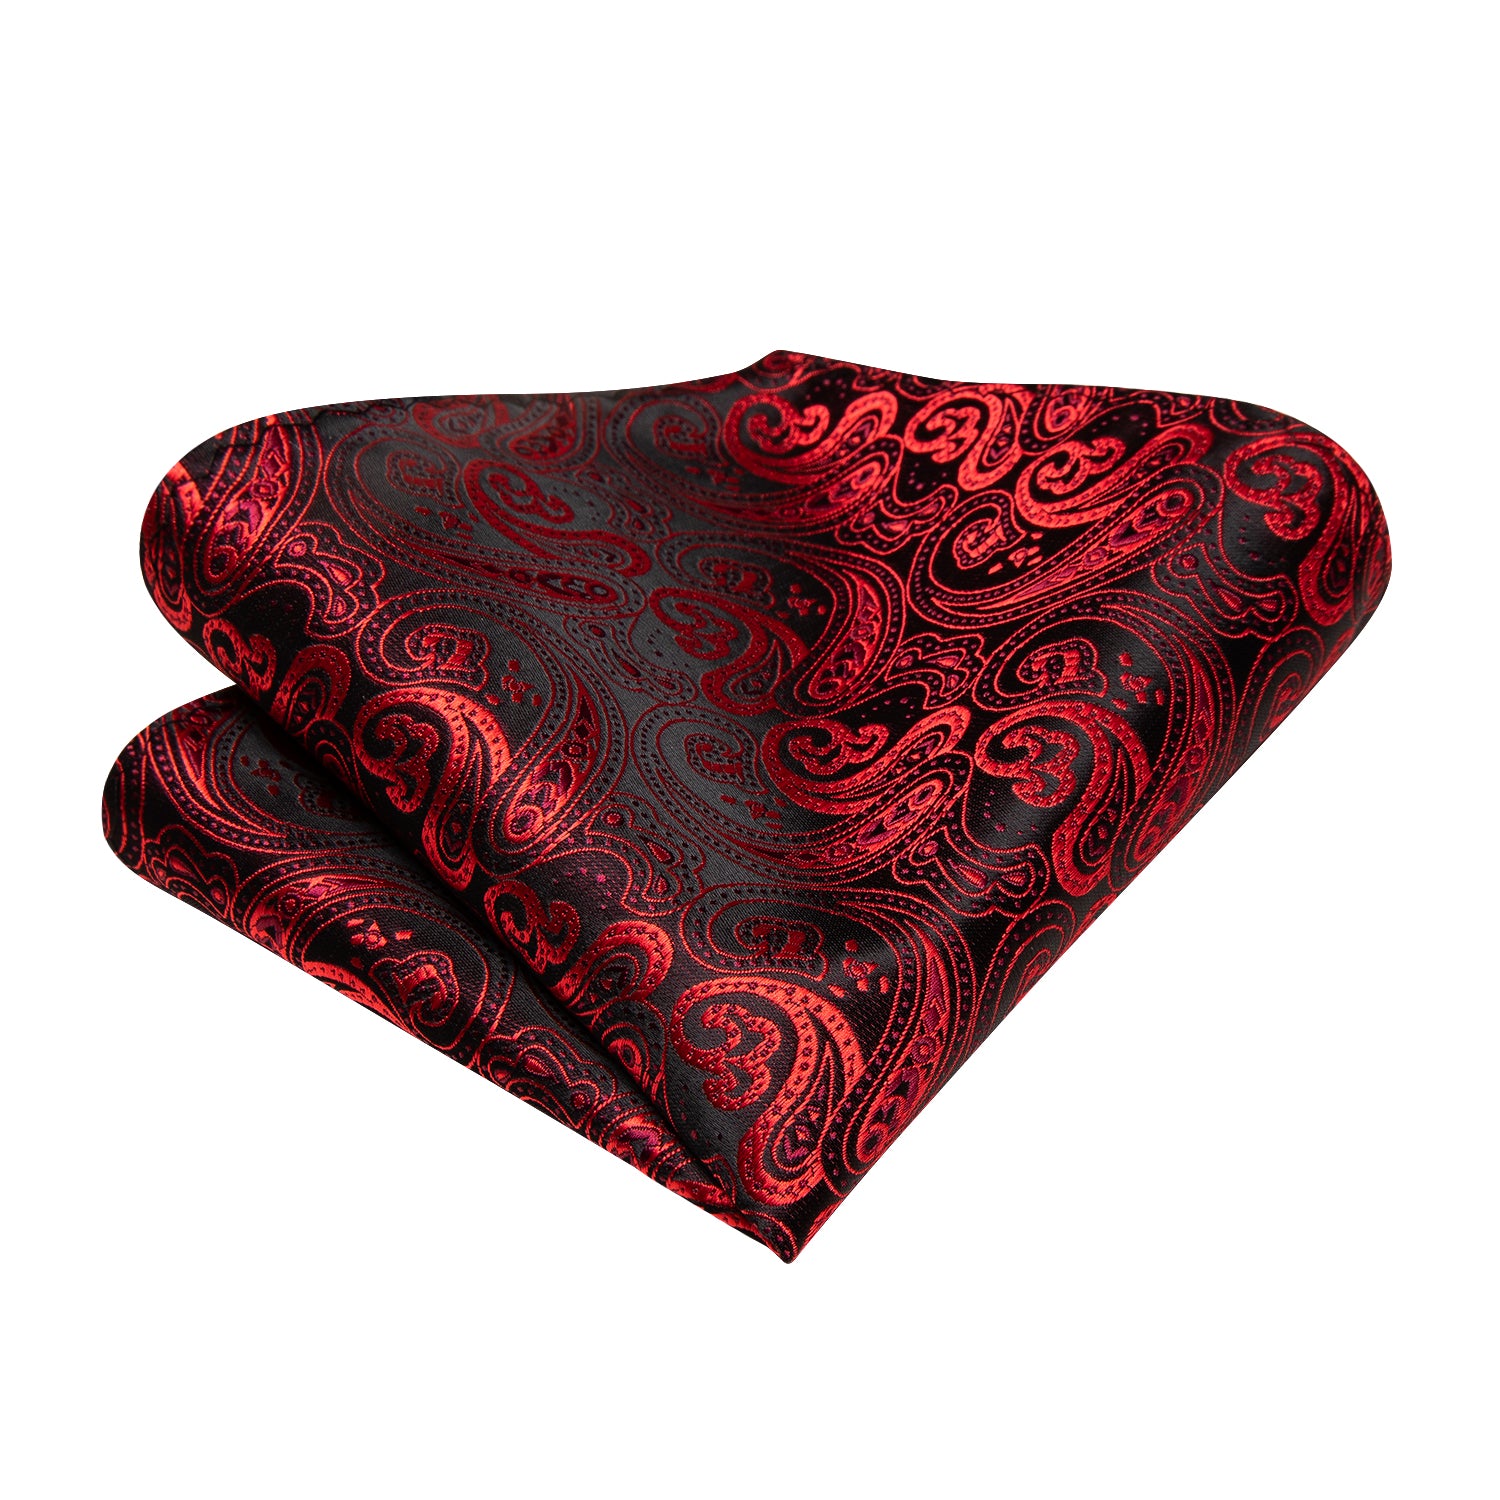 New Black Red Paisley  Self-tied Bow Tie Pocket Square Cufflinks Set